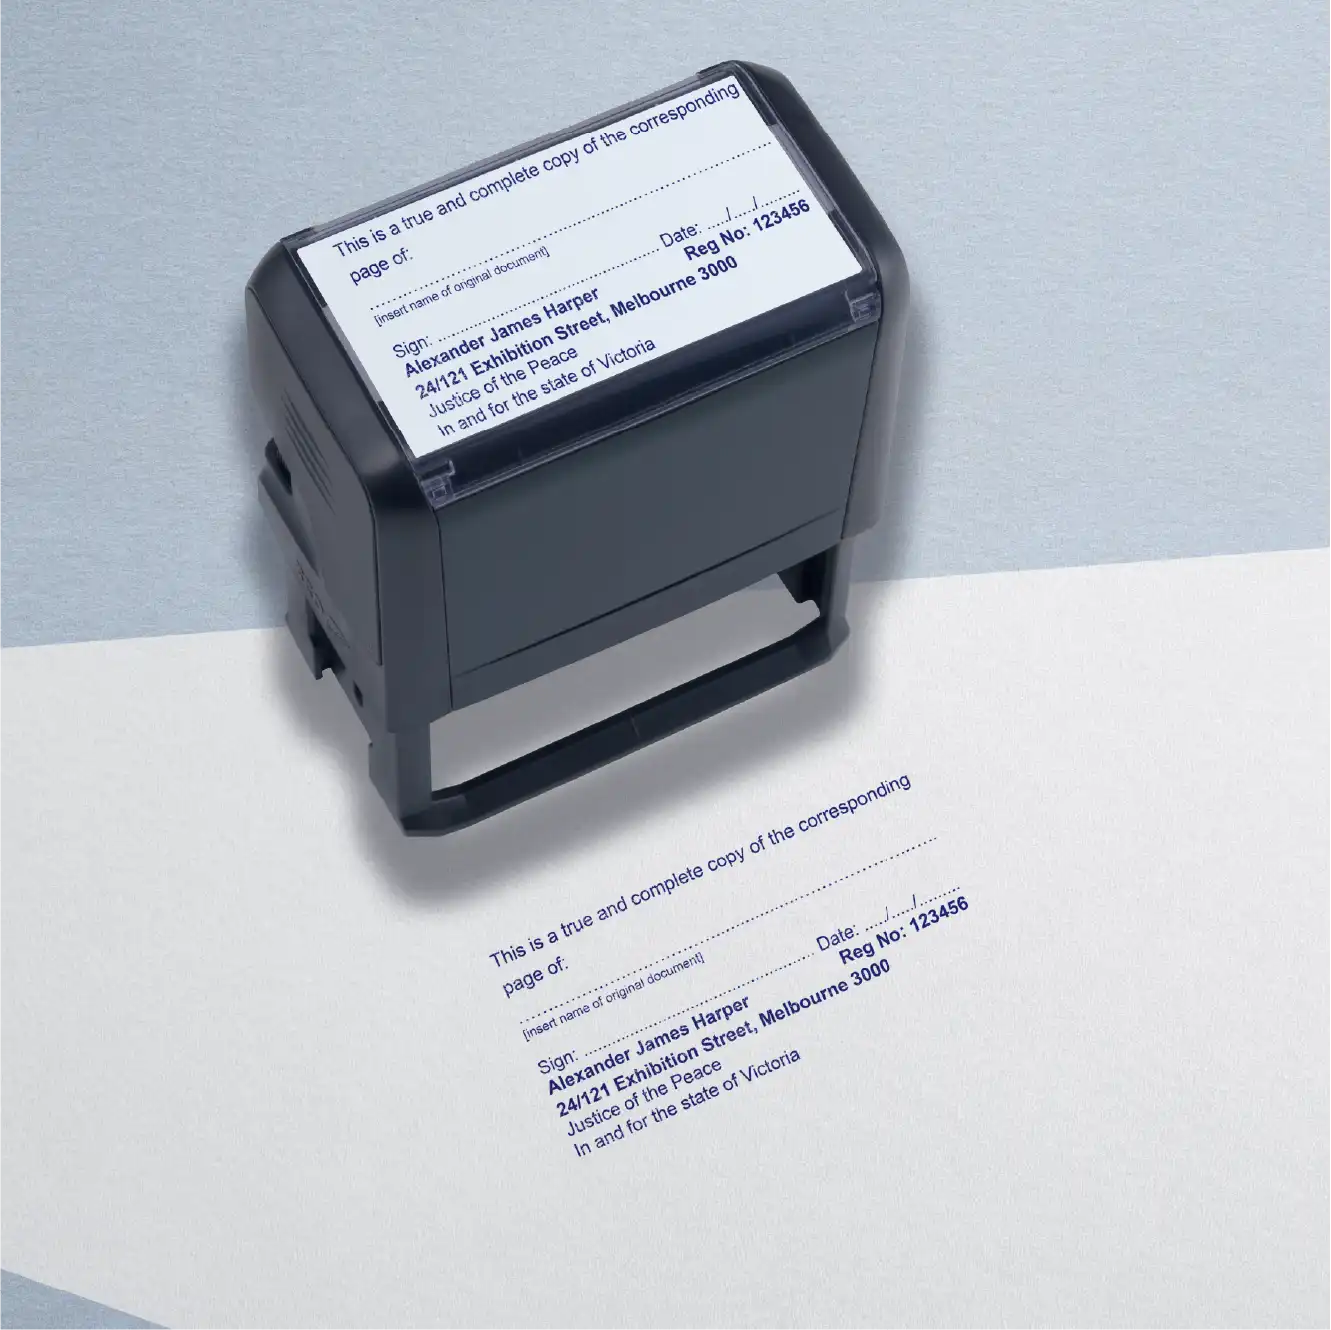 enduring powers of attorney certification stamp blue 